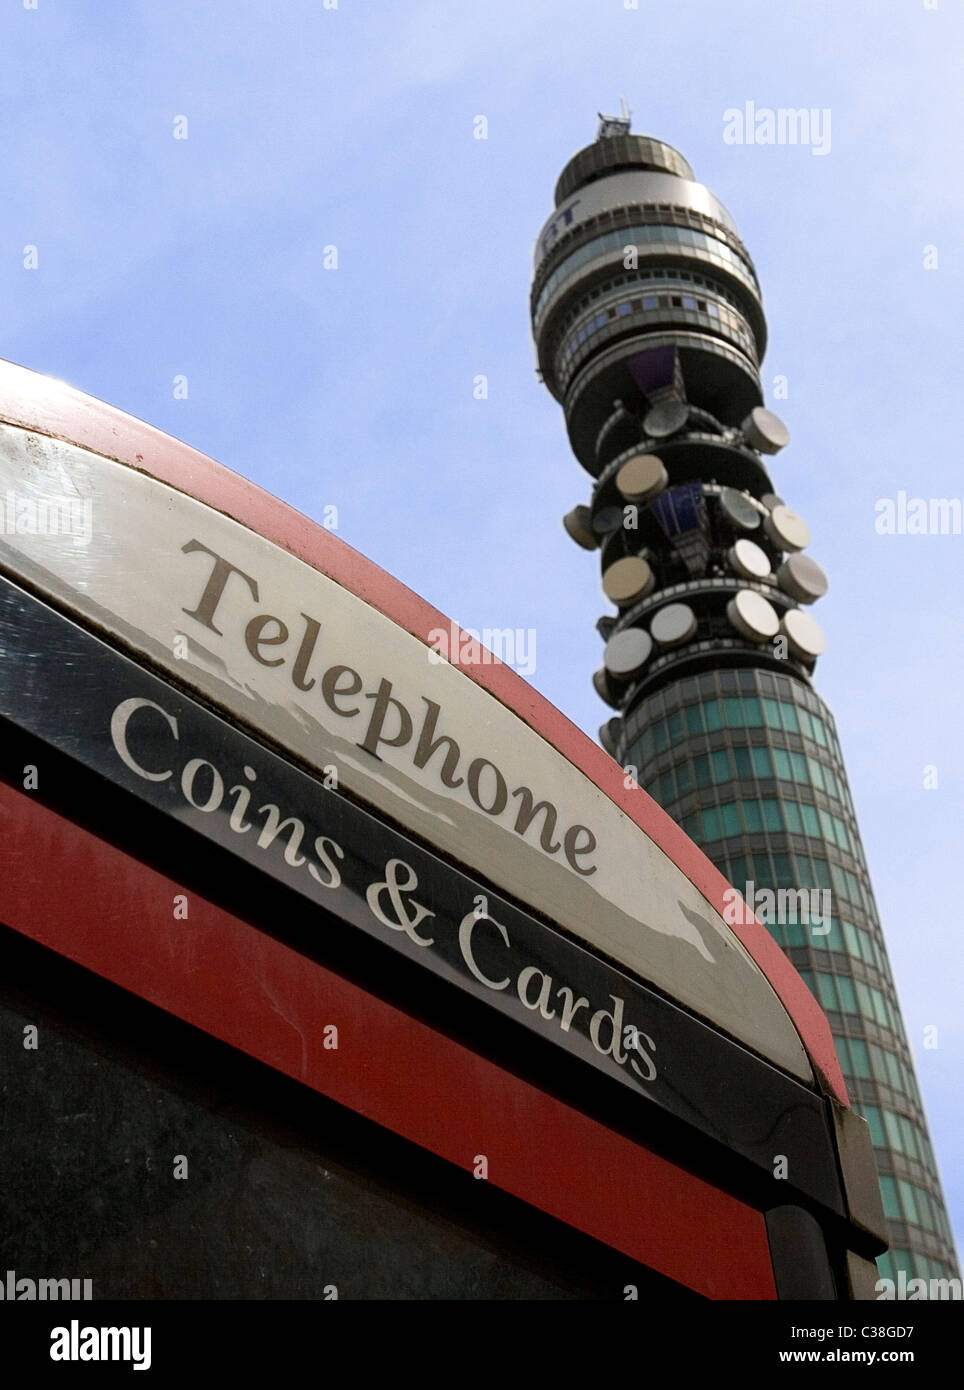 The BT Tower is visible behind a BT telephone booth in central London. Stock Photo